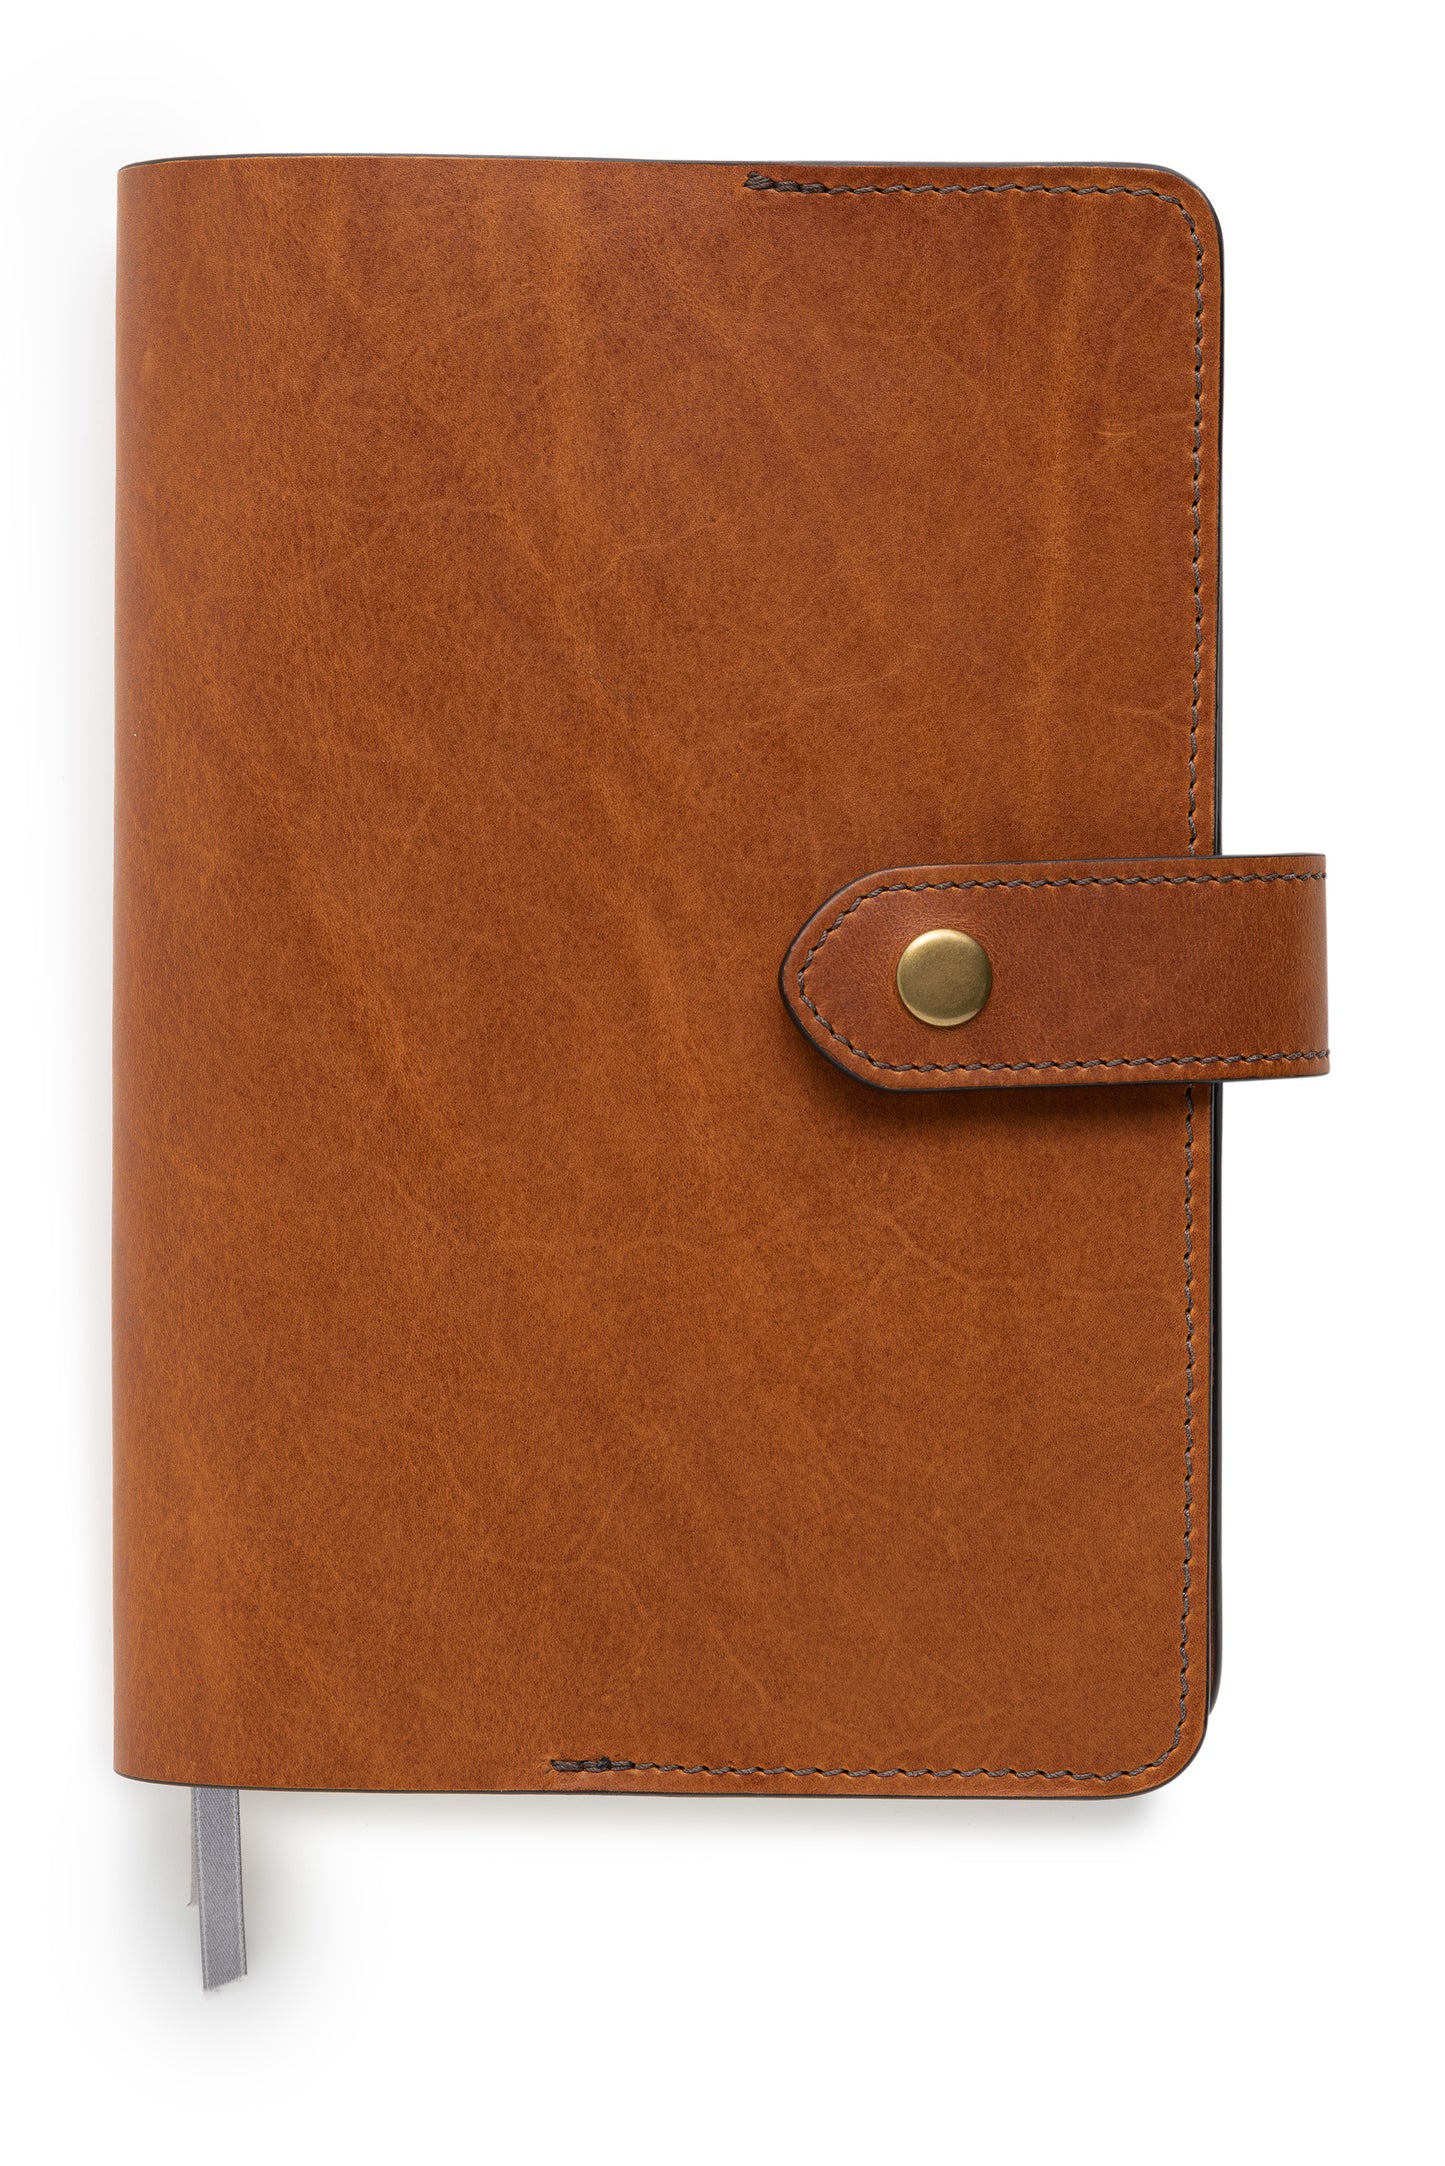 full grain leather planner cover to fit full focus planner by Michael Hyatt in saddle tan front without pen